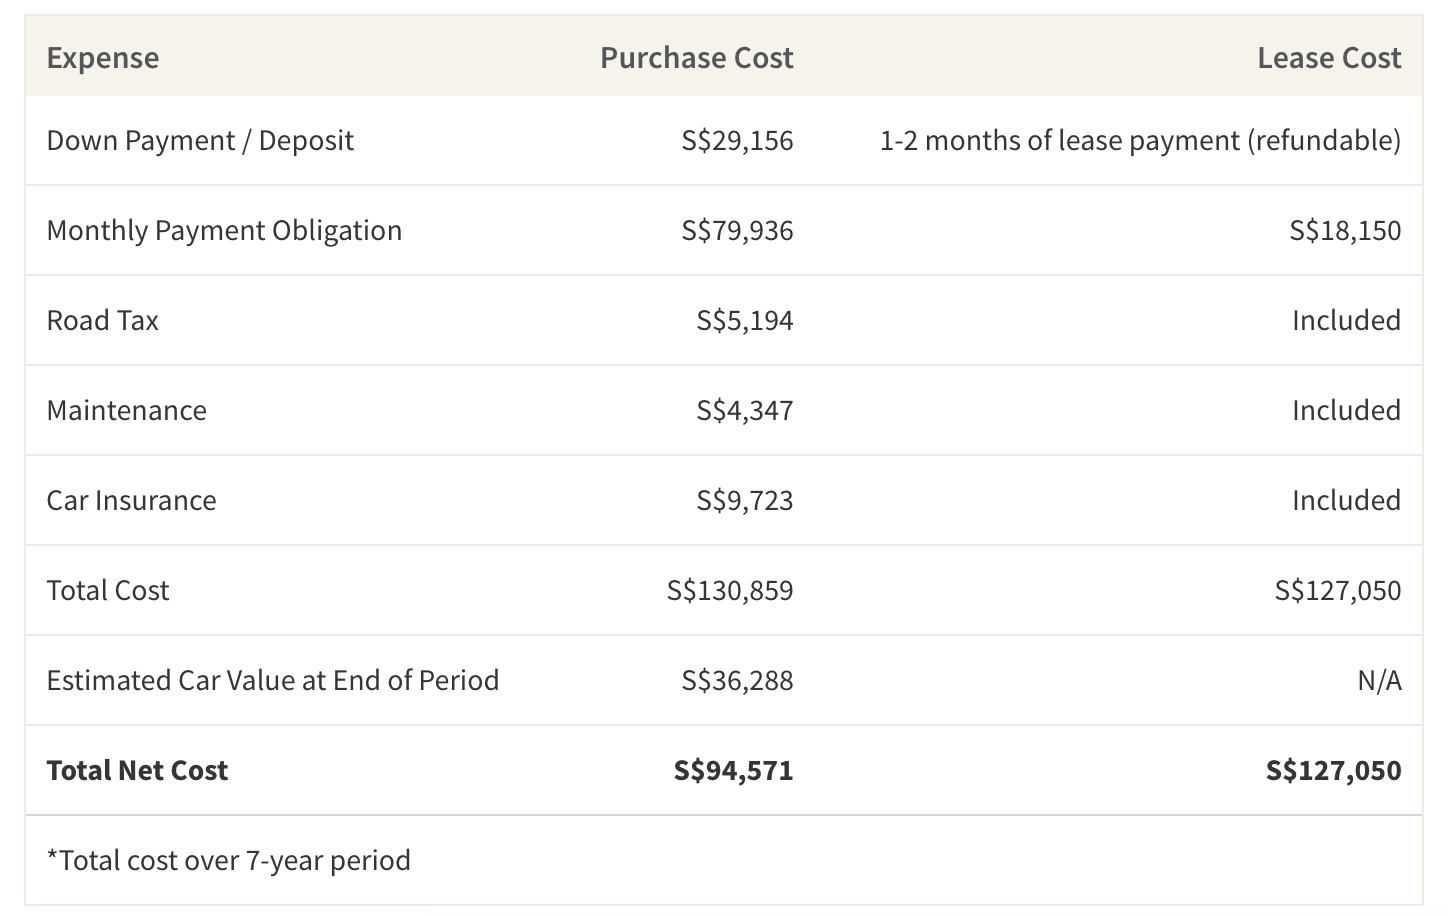 This table shows the average net cost between buying and leasing a Toyota Corolla